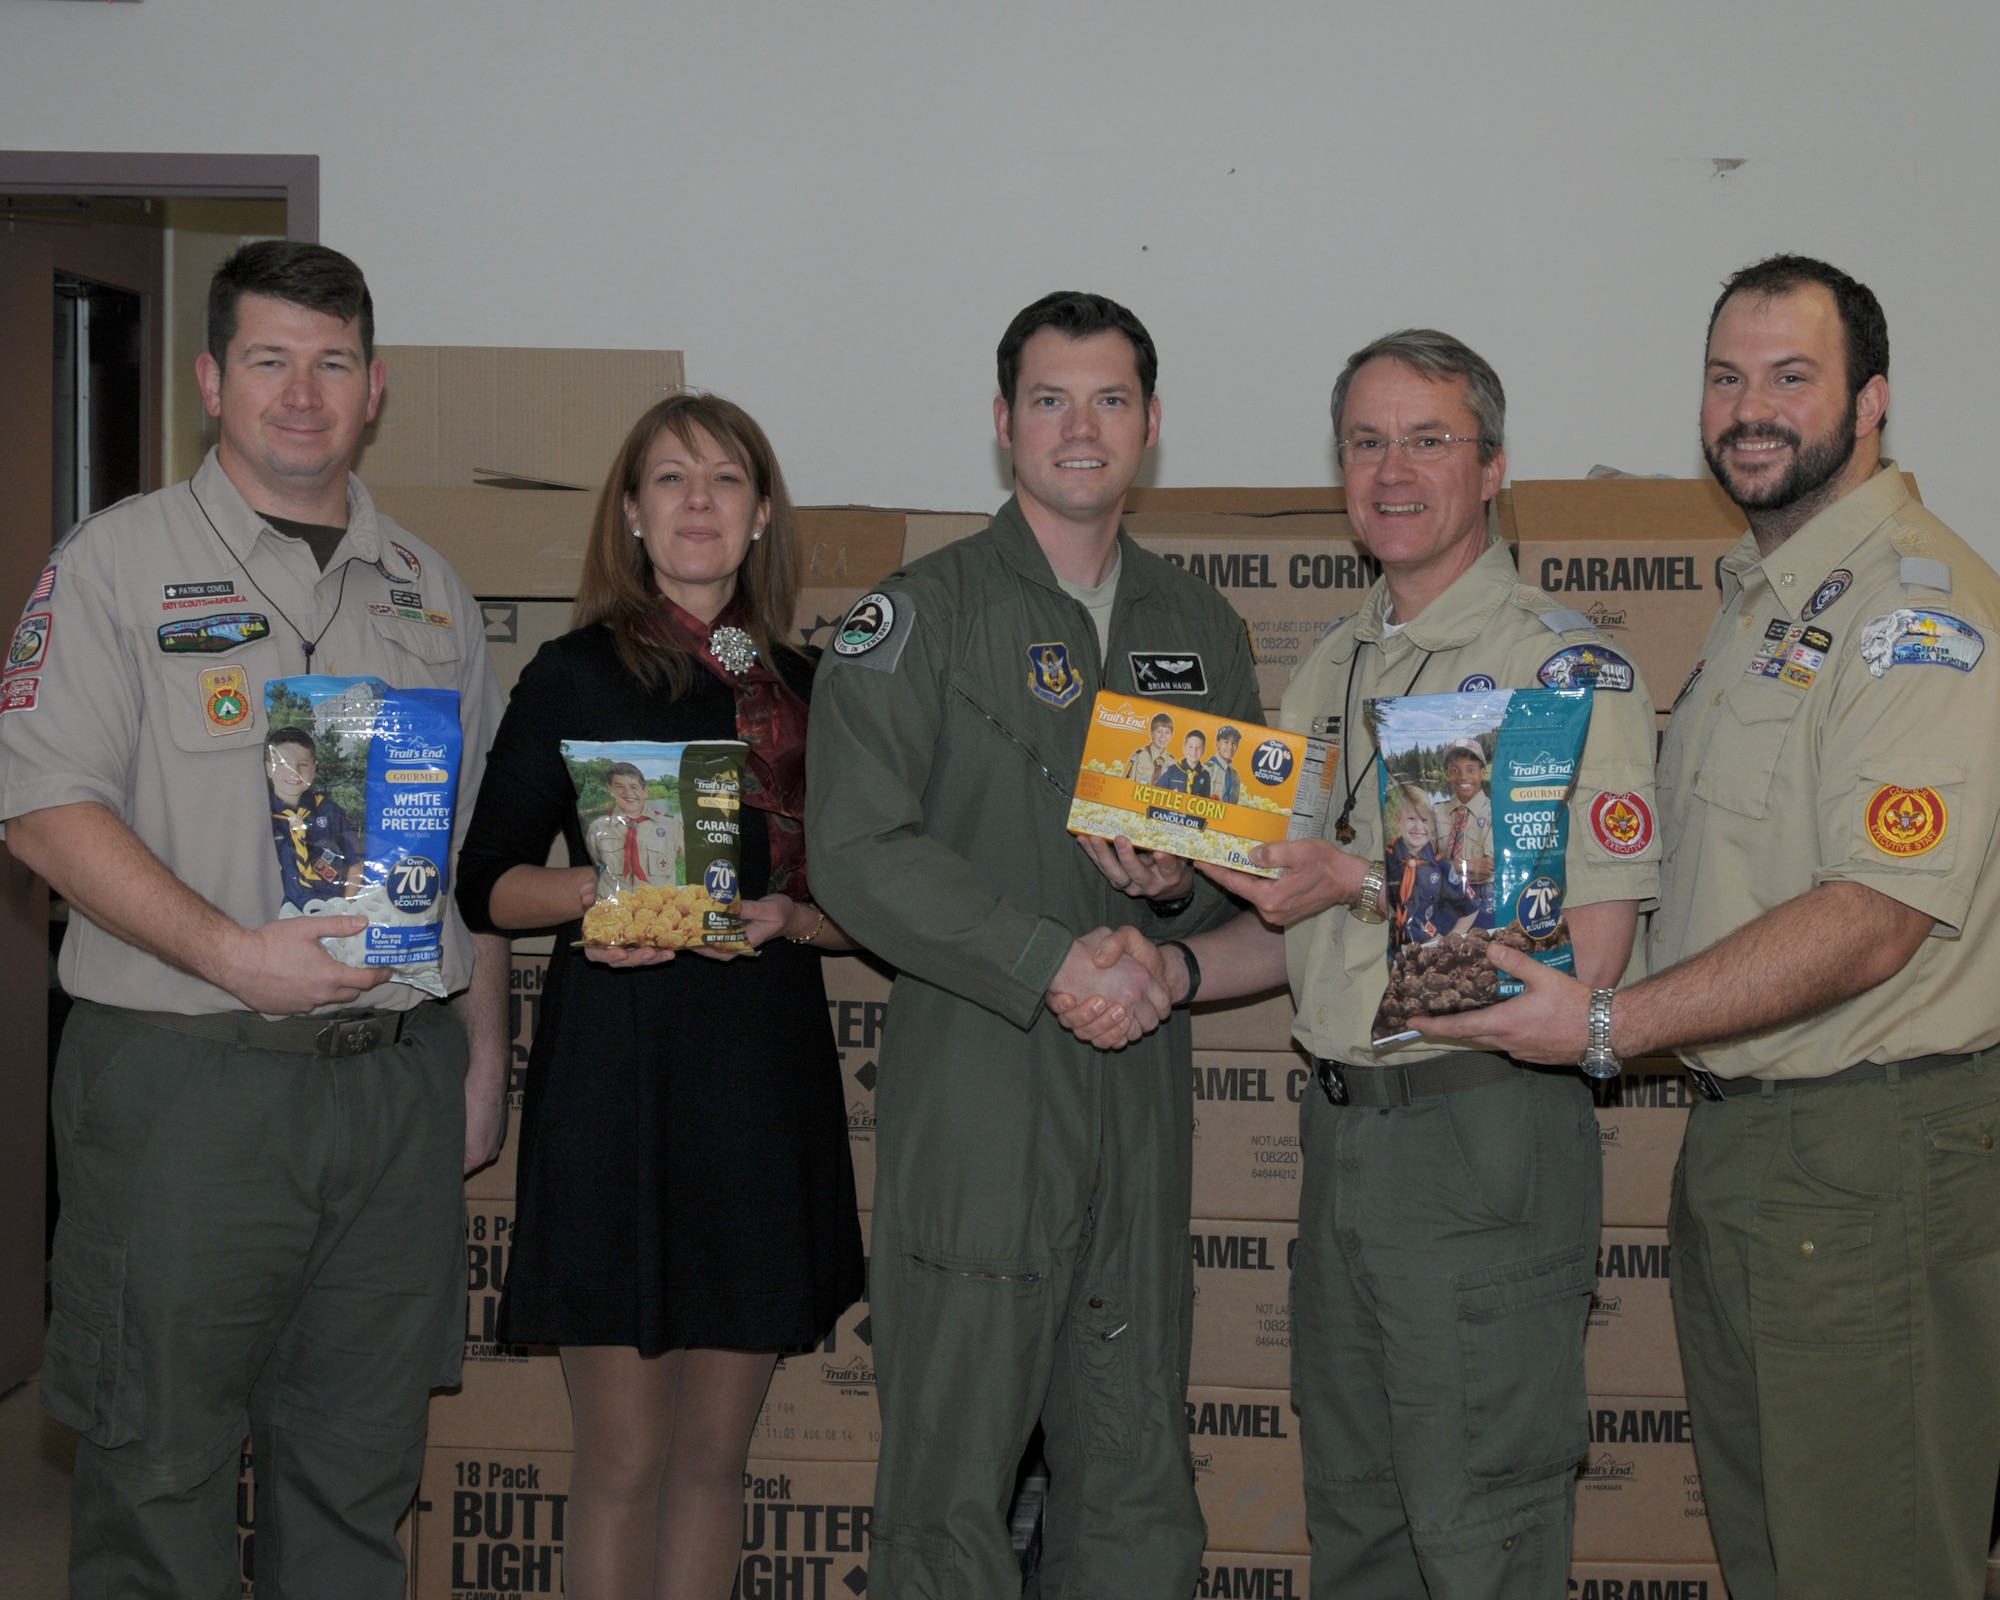 (L to R) Patrick Covell, Boy Scouts Greater Niagara Frontier Council, District Director, Holly Curcione, Niagara Air Reserve Station Friends of Family Support, Treasurer, 1Lt. Brian Haun, 328th Airlift Squadron C-130 Pilot, Russell Etzenhouser, Boy Scouts Greater Niagara Frontier Council CEO, and Justin King, Boy Scouts Greater Niagara Frontier Council, Finance and Marketing Director display the many different delicious varieties of popcorn that are donated to the troops at the Niagara Falls Air Reserve Station, N.Y. on December 17, 2014. The popcorn will be made available to all military members at the base for the holiday season and beyond. (U.S. Air Force photo by Peter Borys)